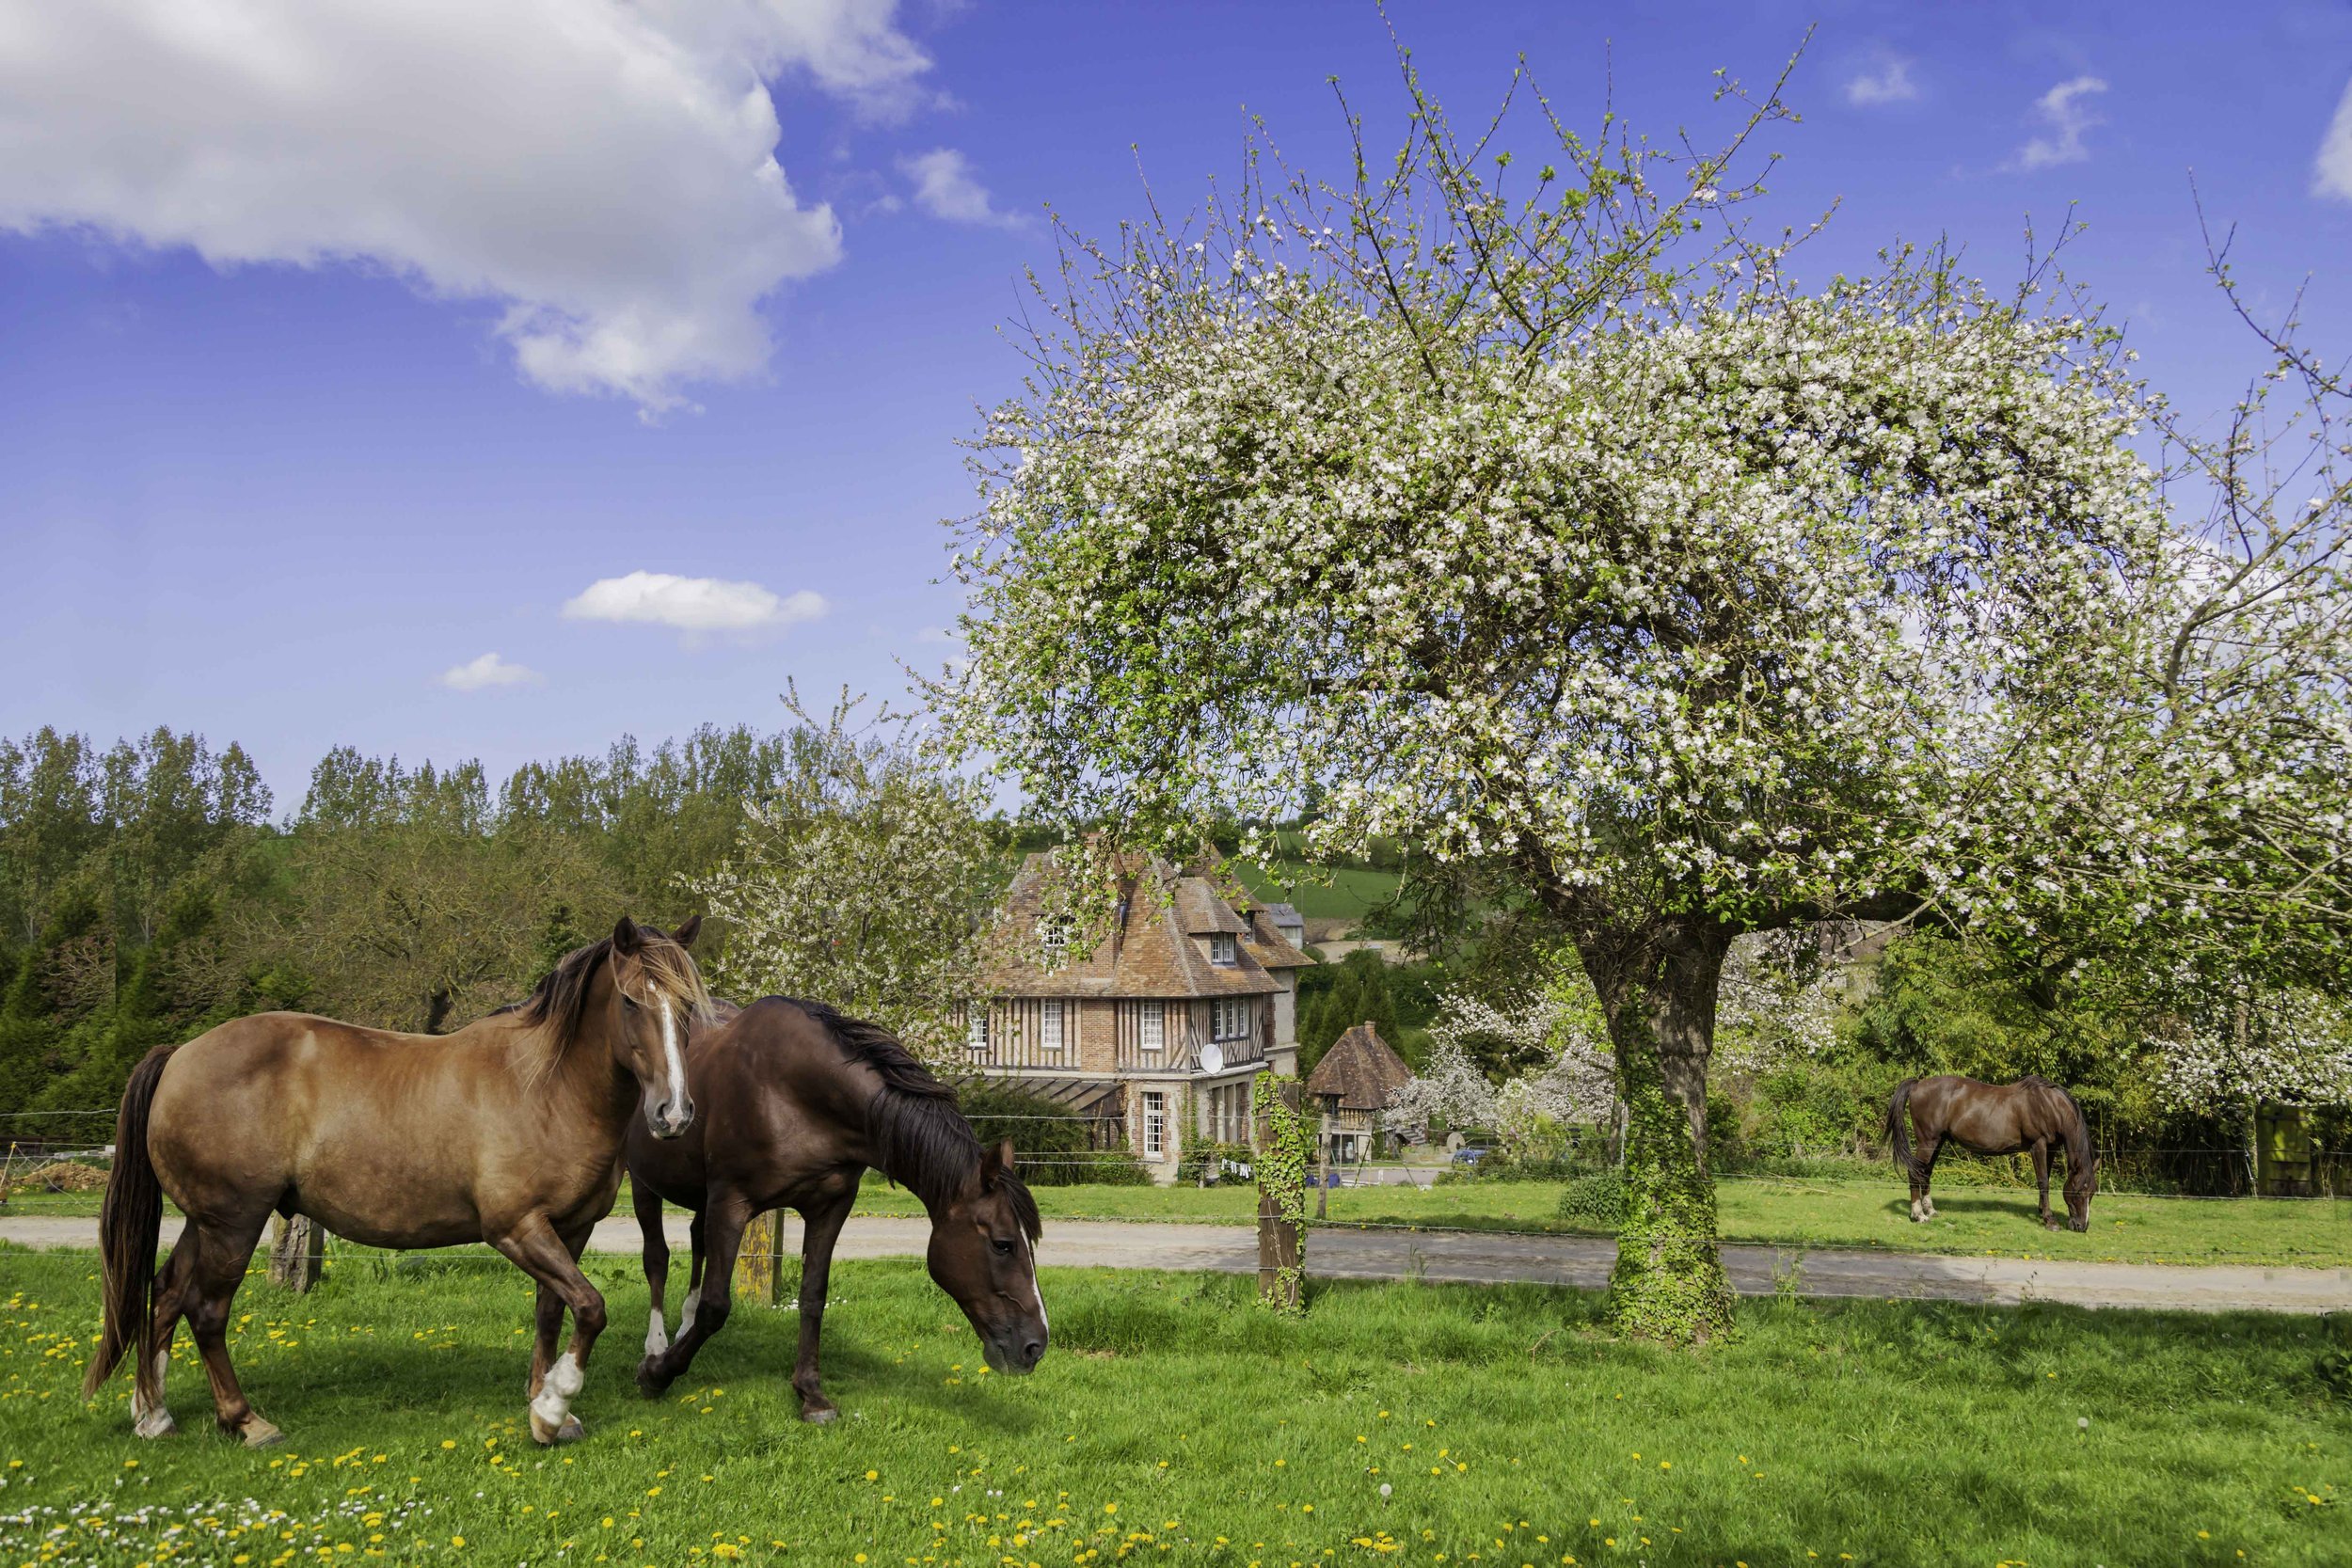 Two horses grazing in a grassy field under an apple  tree covered in blossom on a bright day in Normandy.